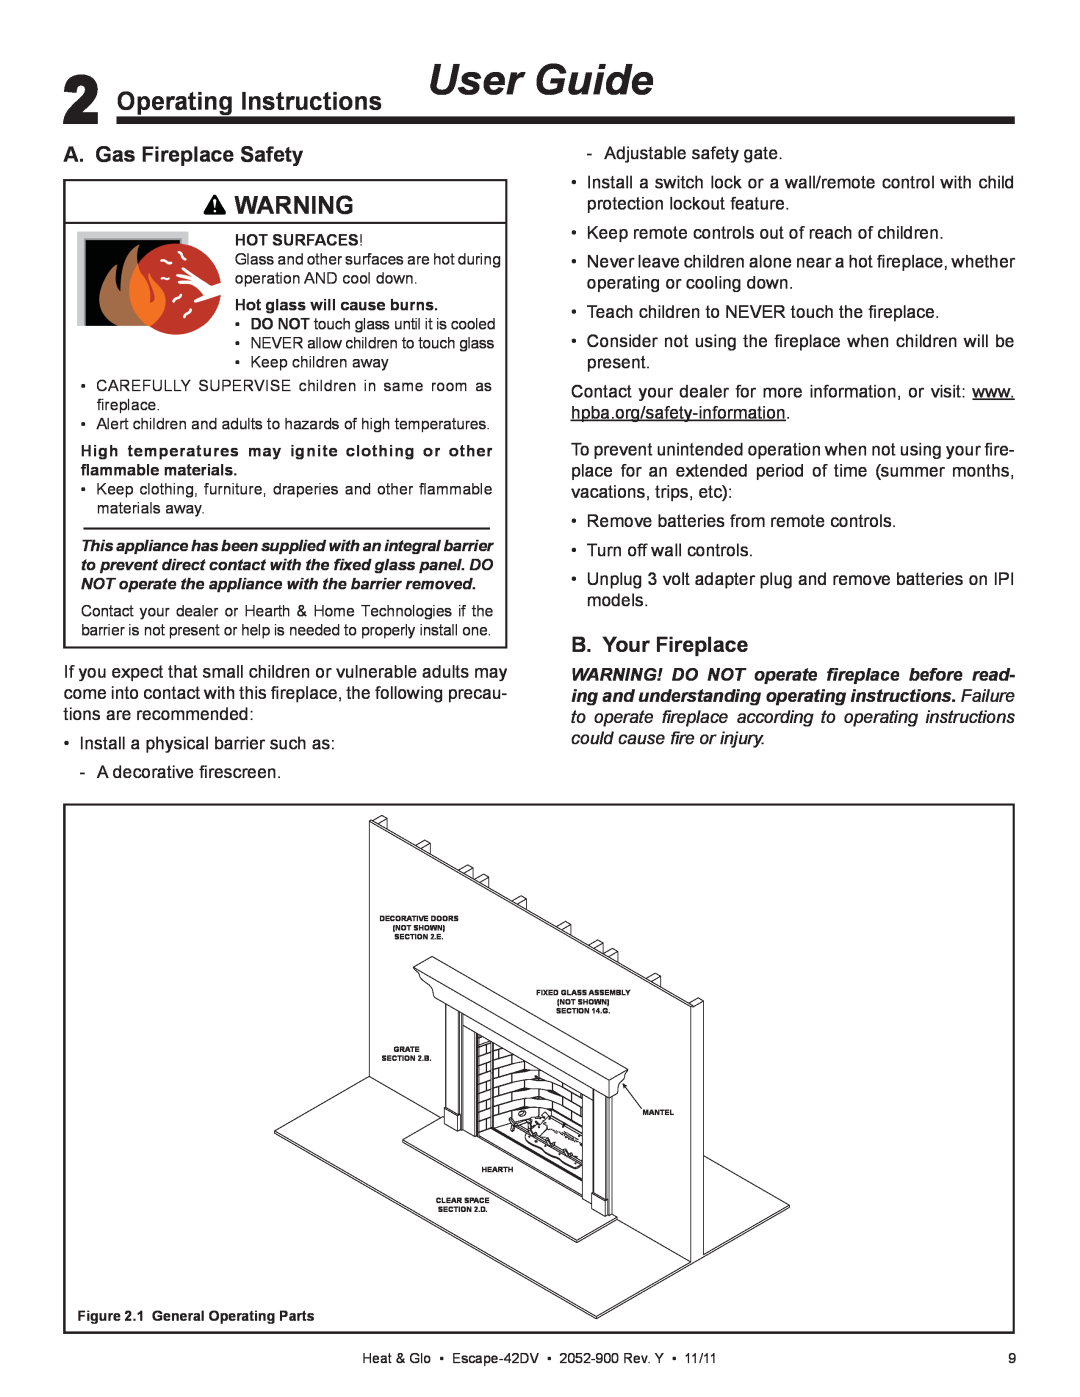 Heat & Glo LifeStyle Escape-42DVLP Operating Instructions User Guide, A. Gas Fireplace Safety, B. Your Fireplace 